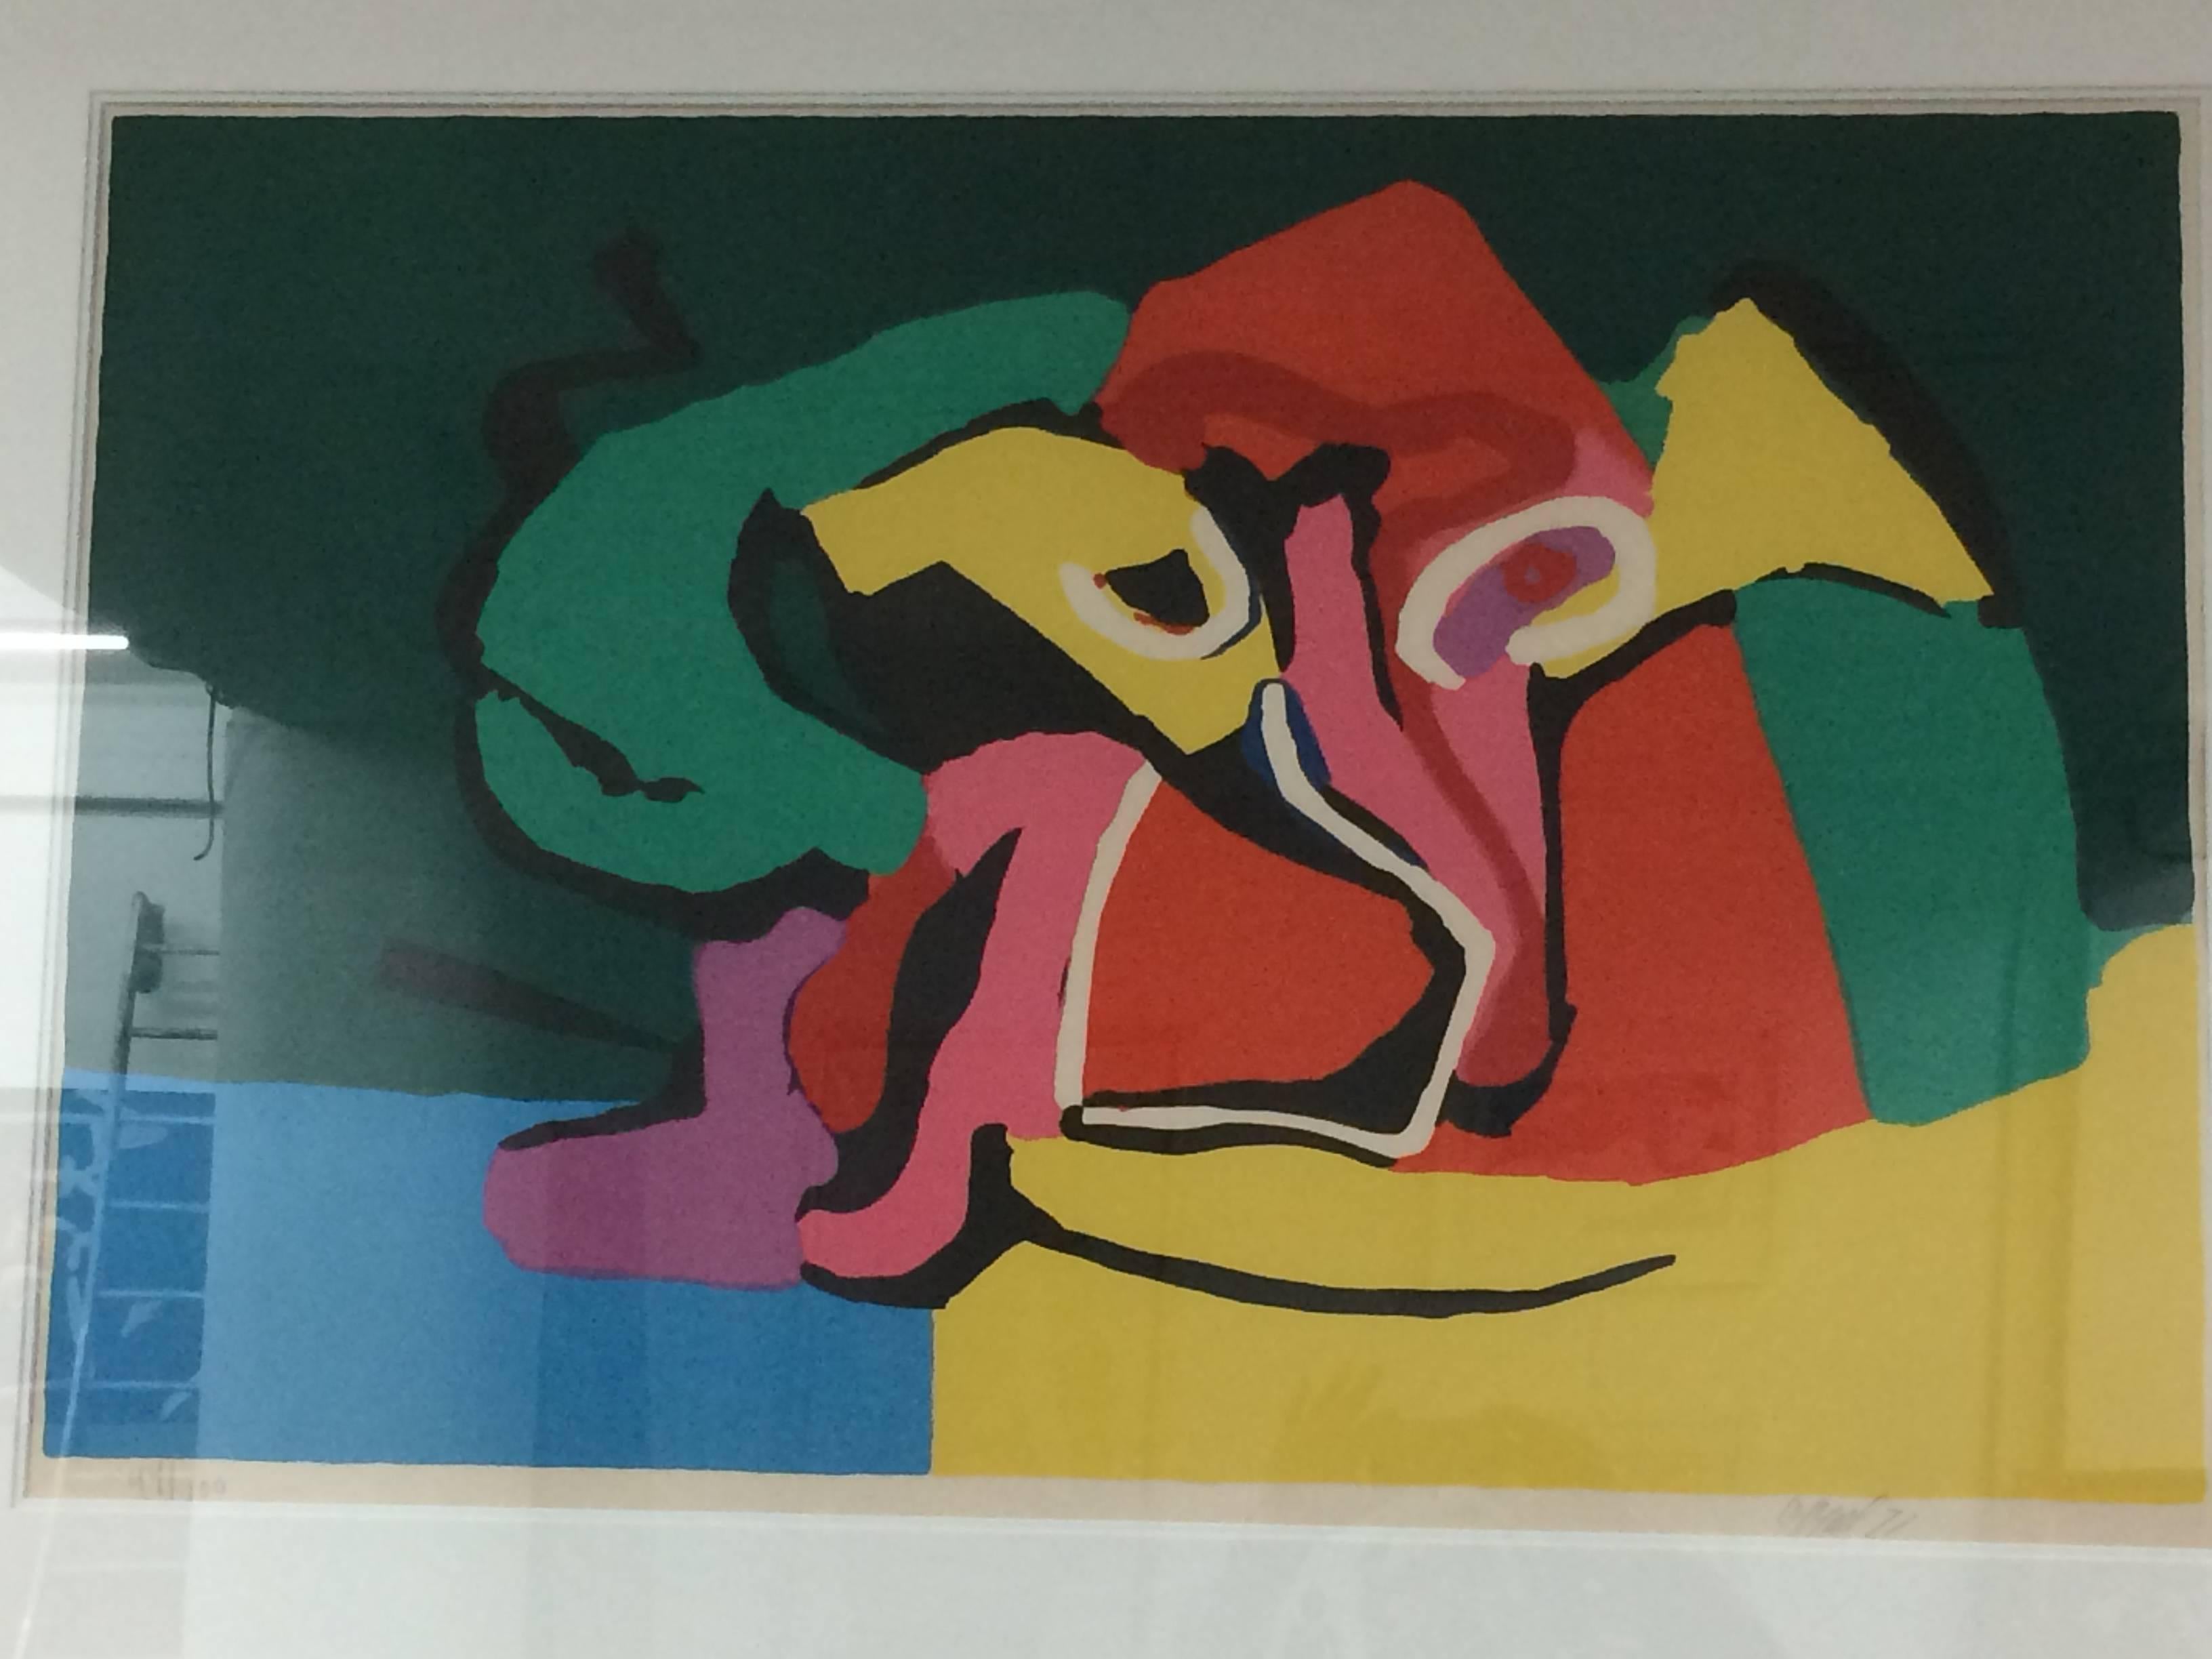 Signed, numbered (44/100) and dated '71 lithography of Karel Appel. Measures: 68 x 102 cm.